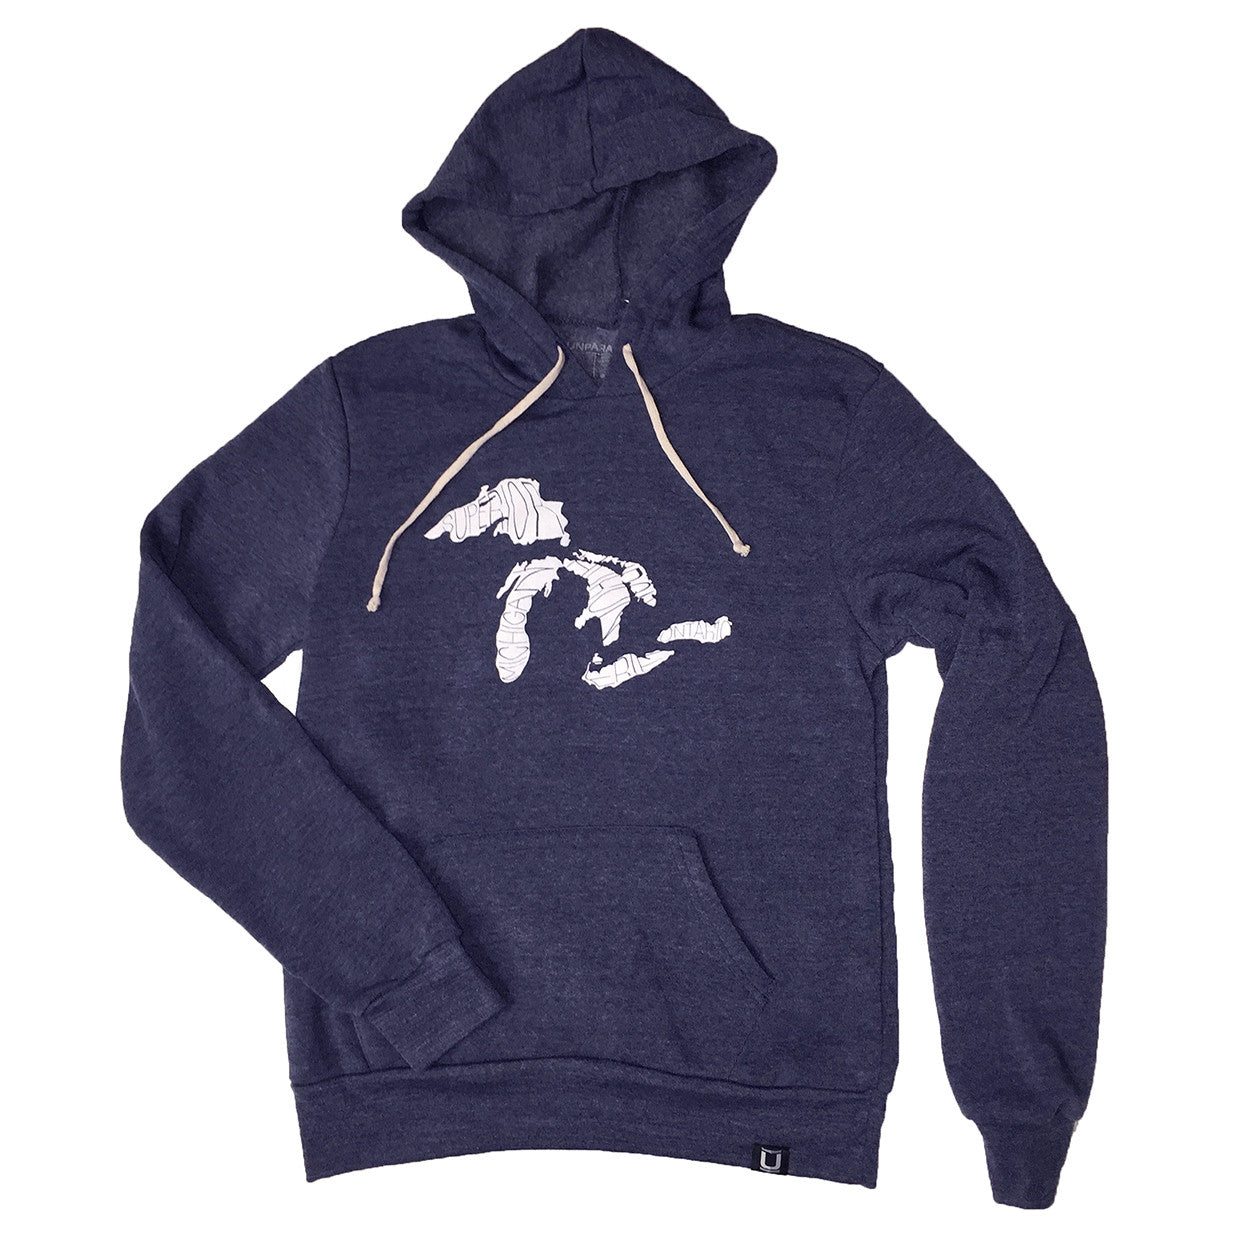 Great Lakes Apparel: The Best Michigan Made Gifts